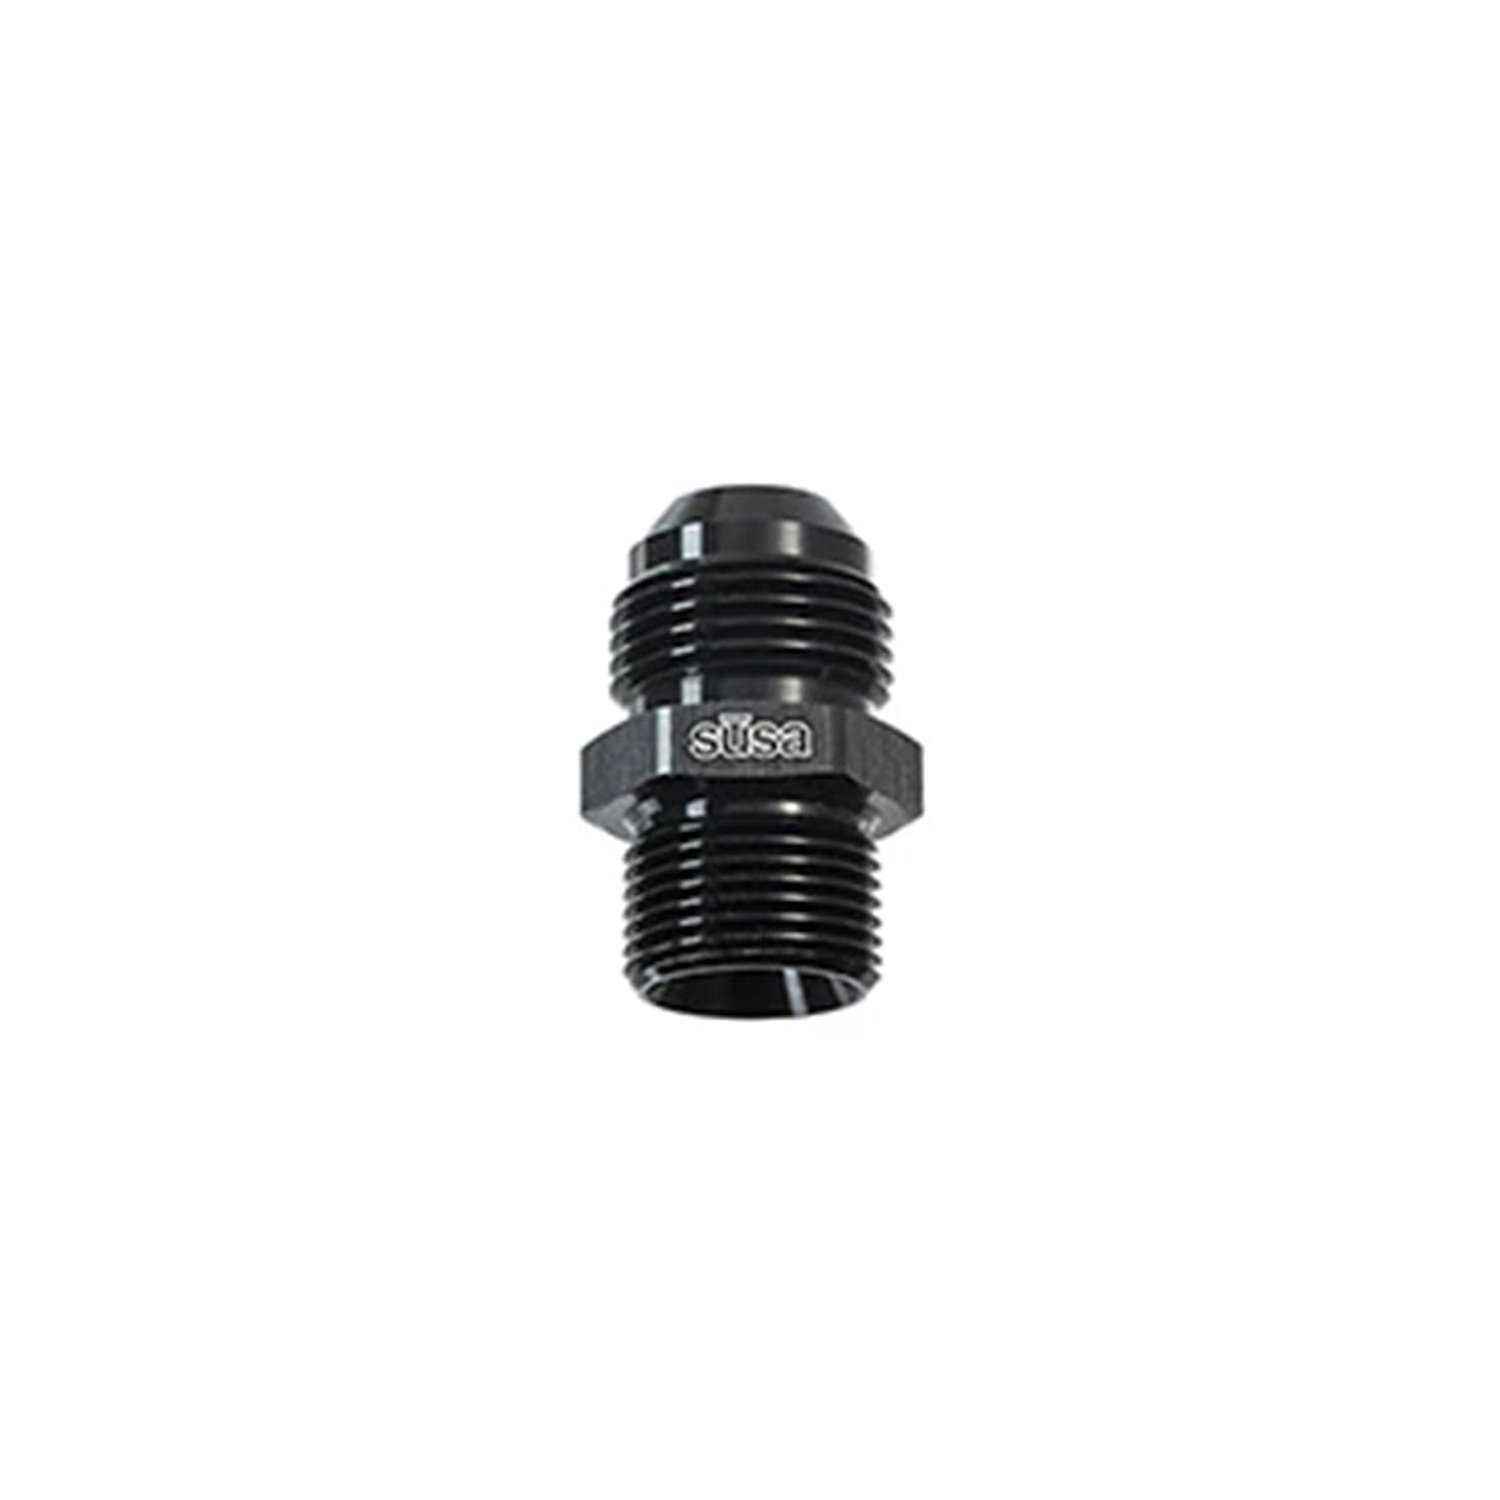 22-M18AN10-00 Adapter Fitting, M18 Male to AN010 Male, Straight